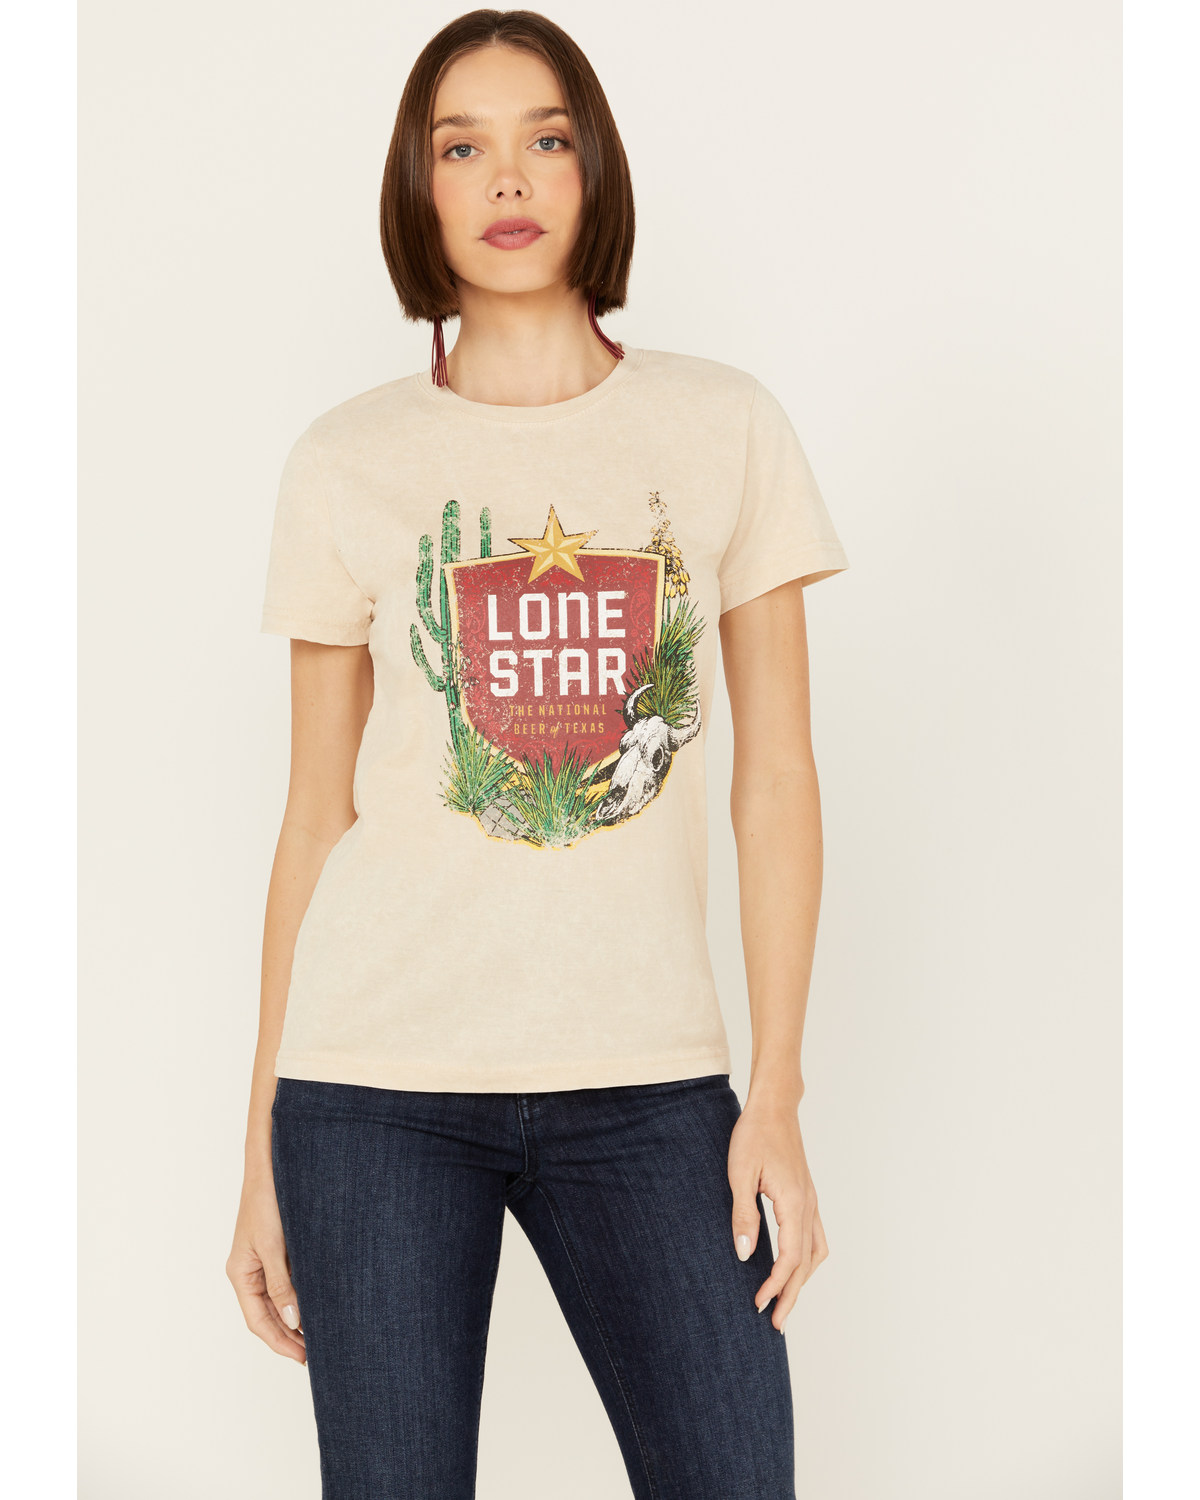 Changes Women's Lone Star Short Sleeve Graphic Tee